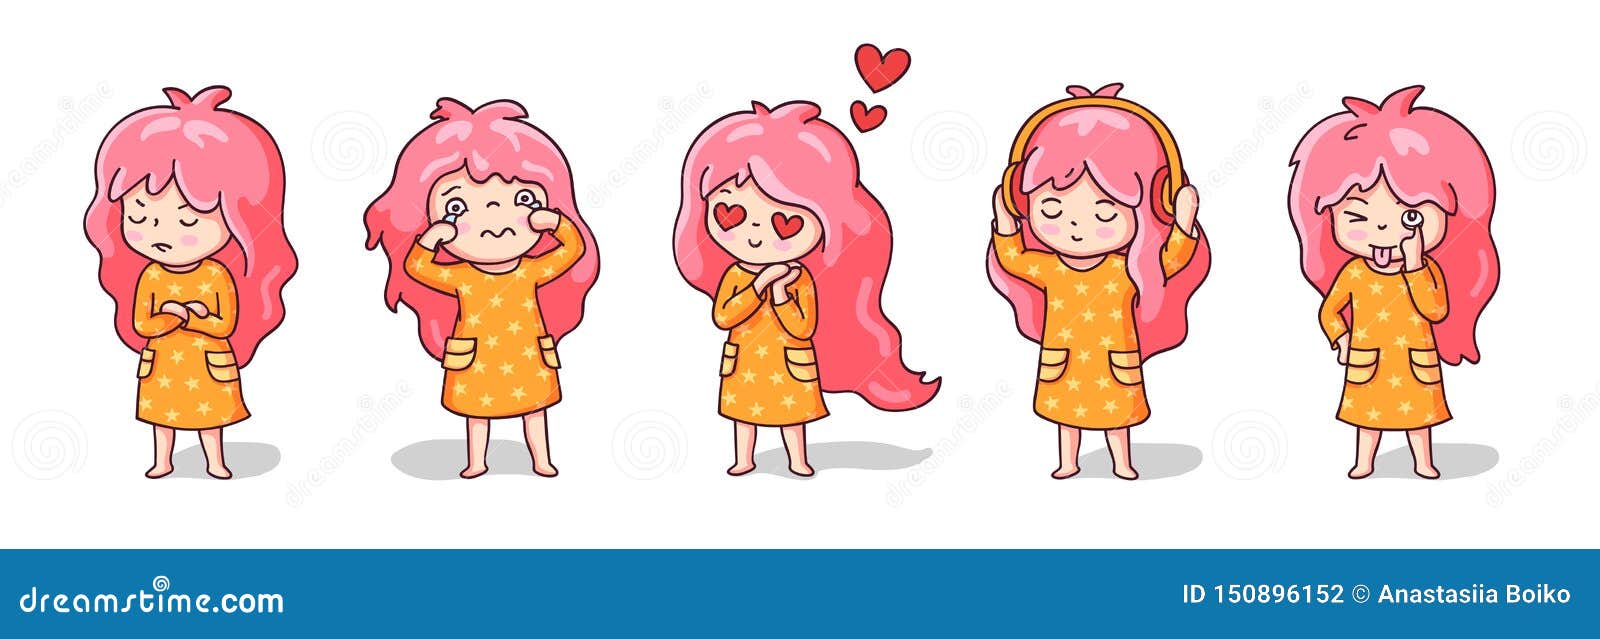 Little Funny Girls in Orange Pajamas. Girls in Love, Listening To Music,  Making Faces, Crying, Offended. Stock Vector - Illustration of children,  contour: 150896152